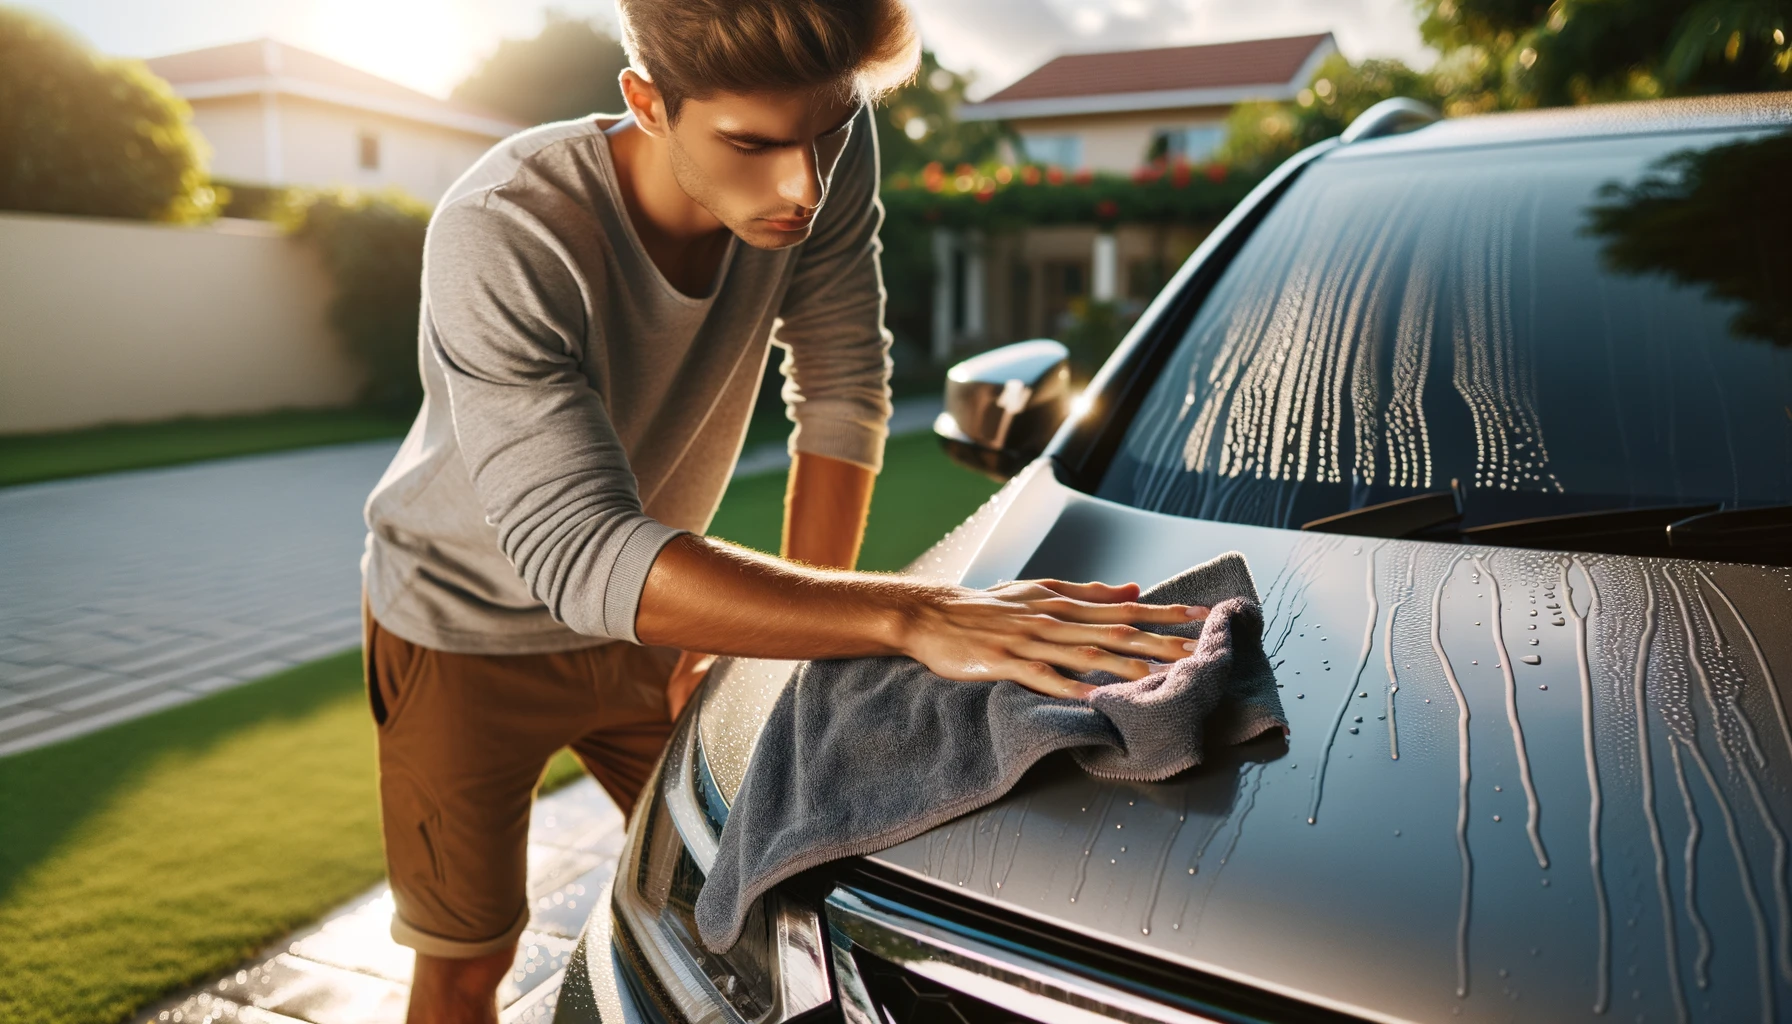 How to Wash Your Car?